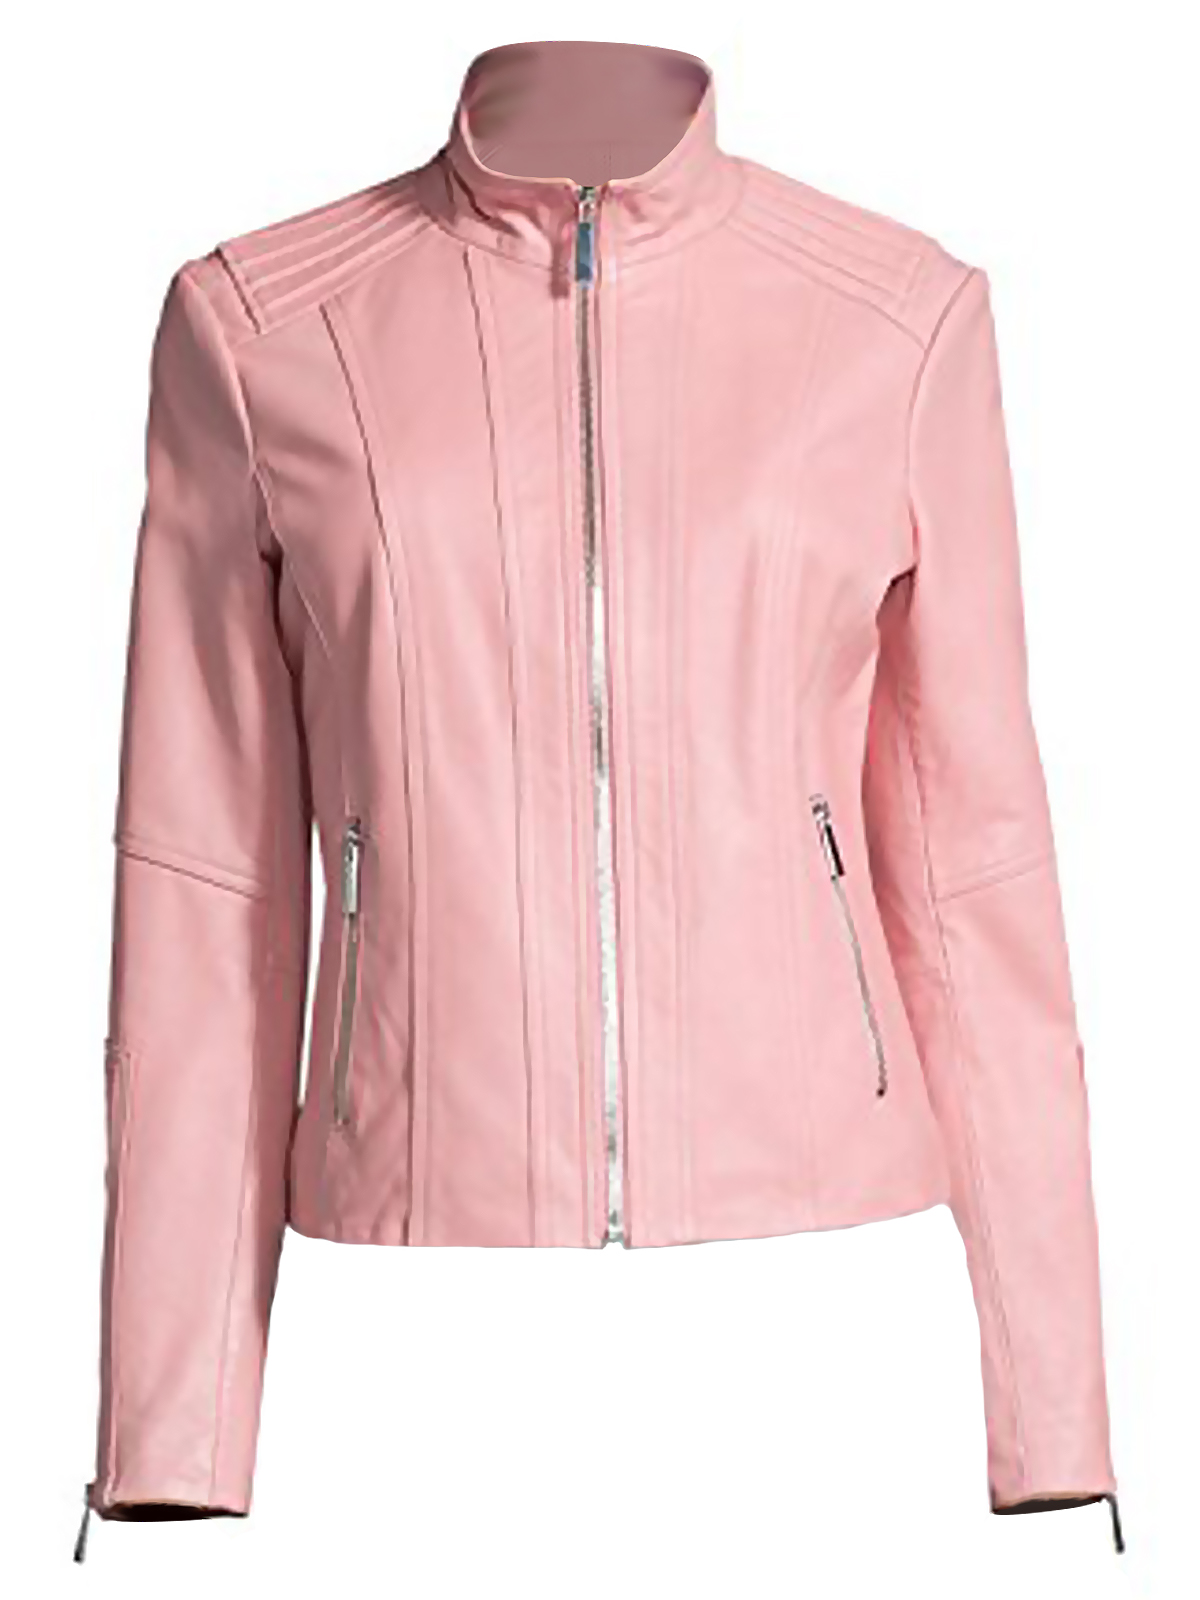 Women’s New Style Casual Pink Leather Jacket